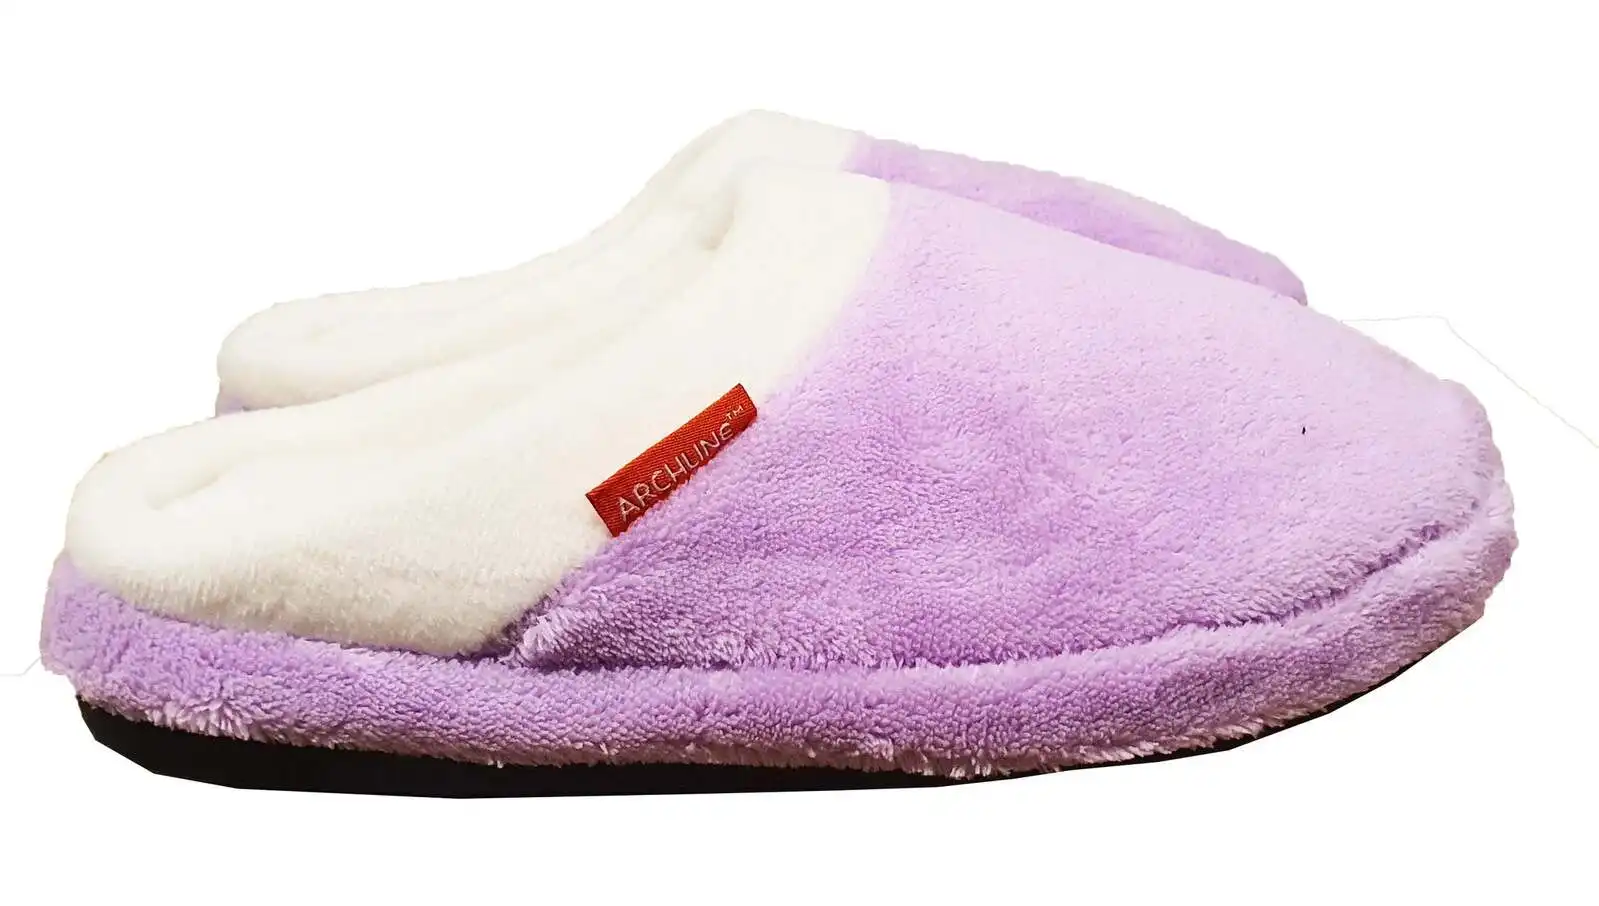 Archline Orthotic Slippers Slip On Arch Scuffs Pain Relief Moccasins - Lilac